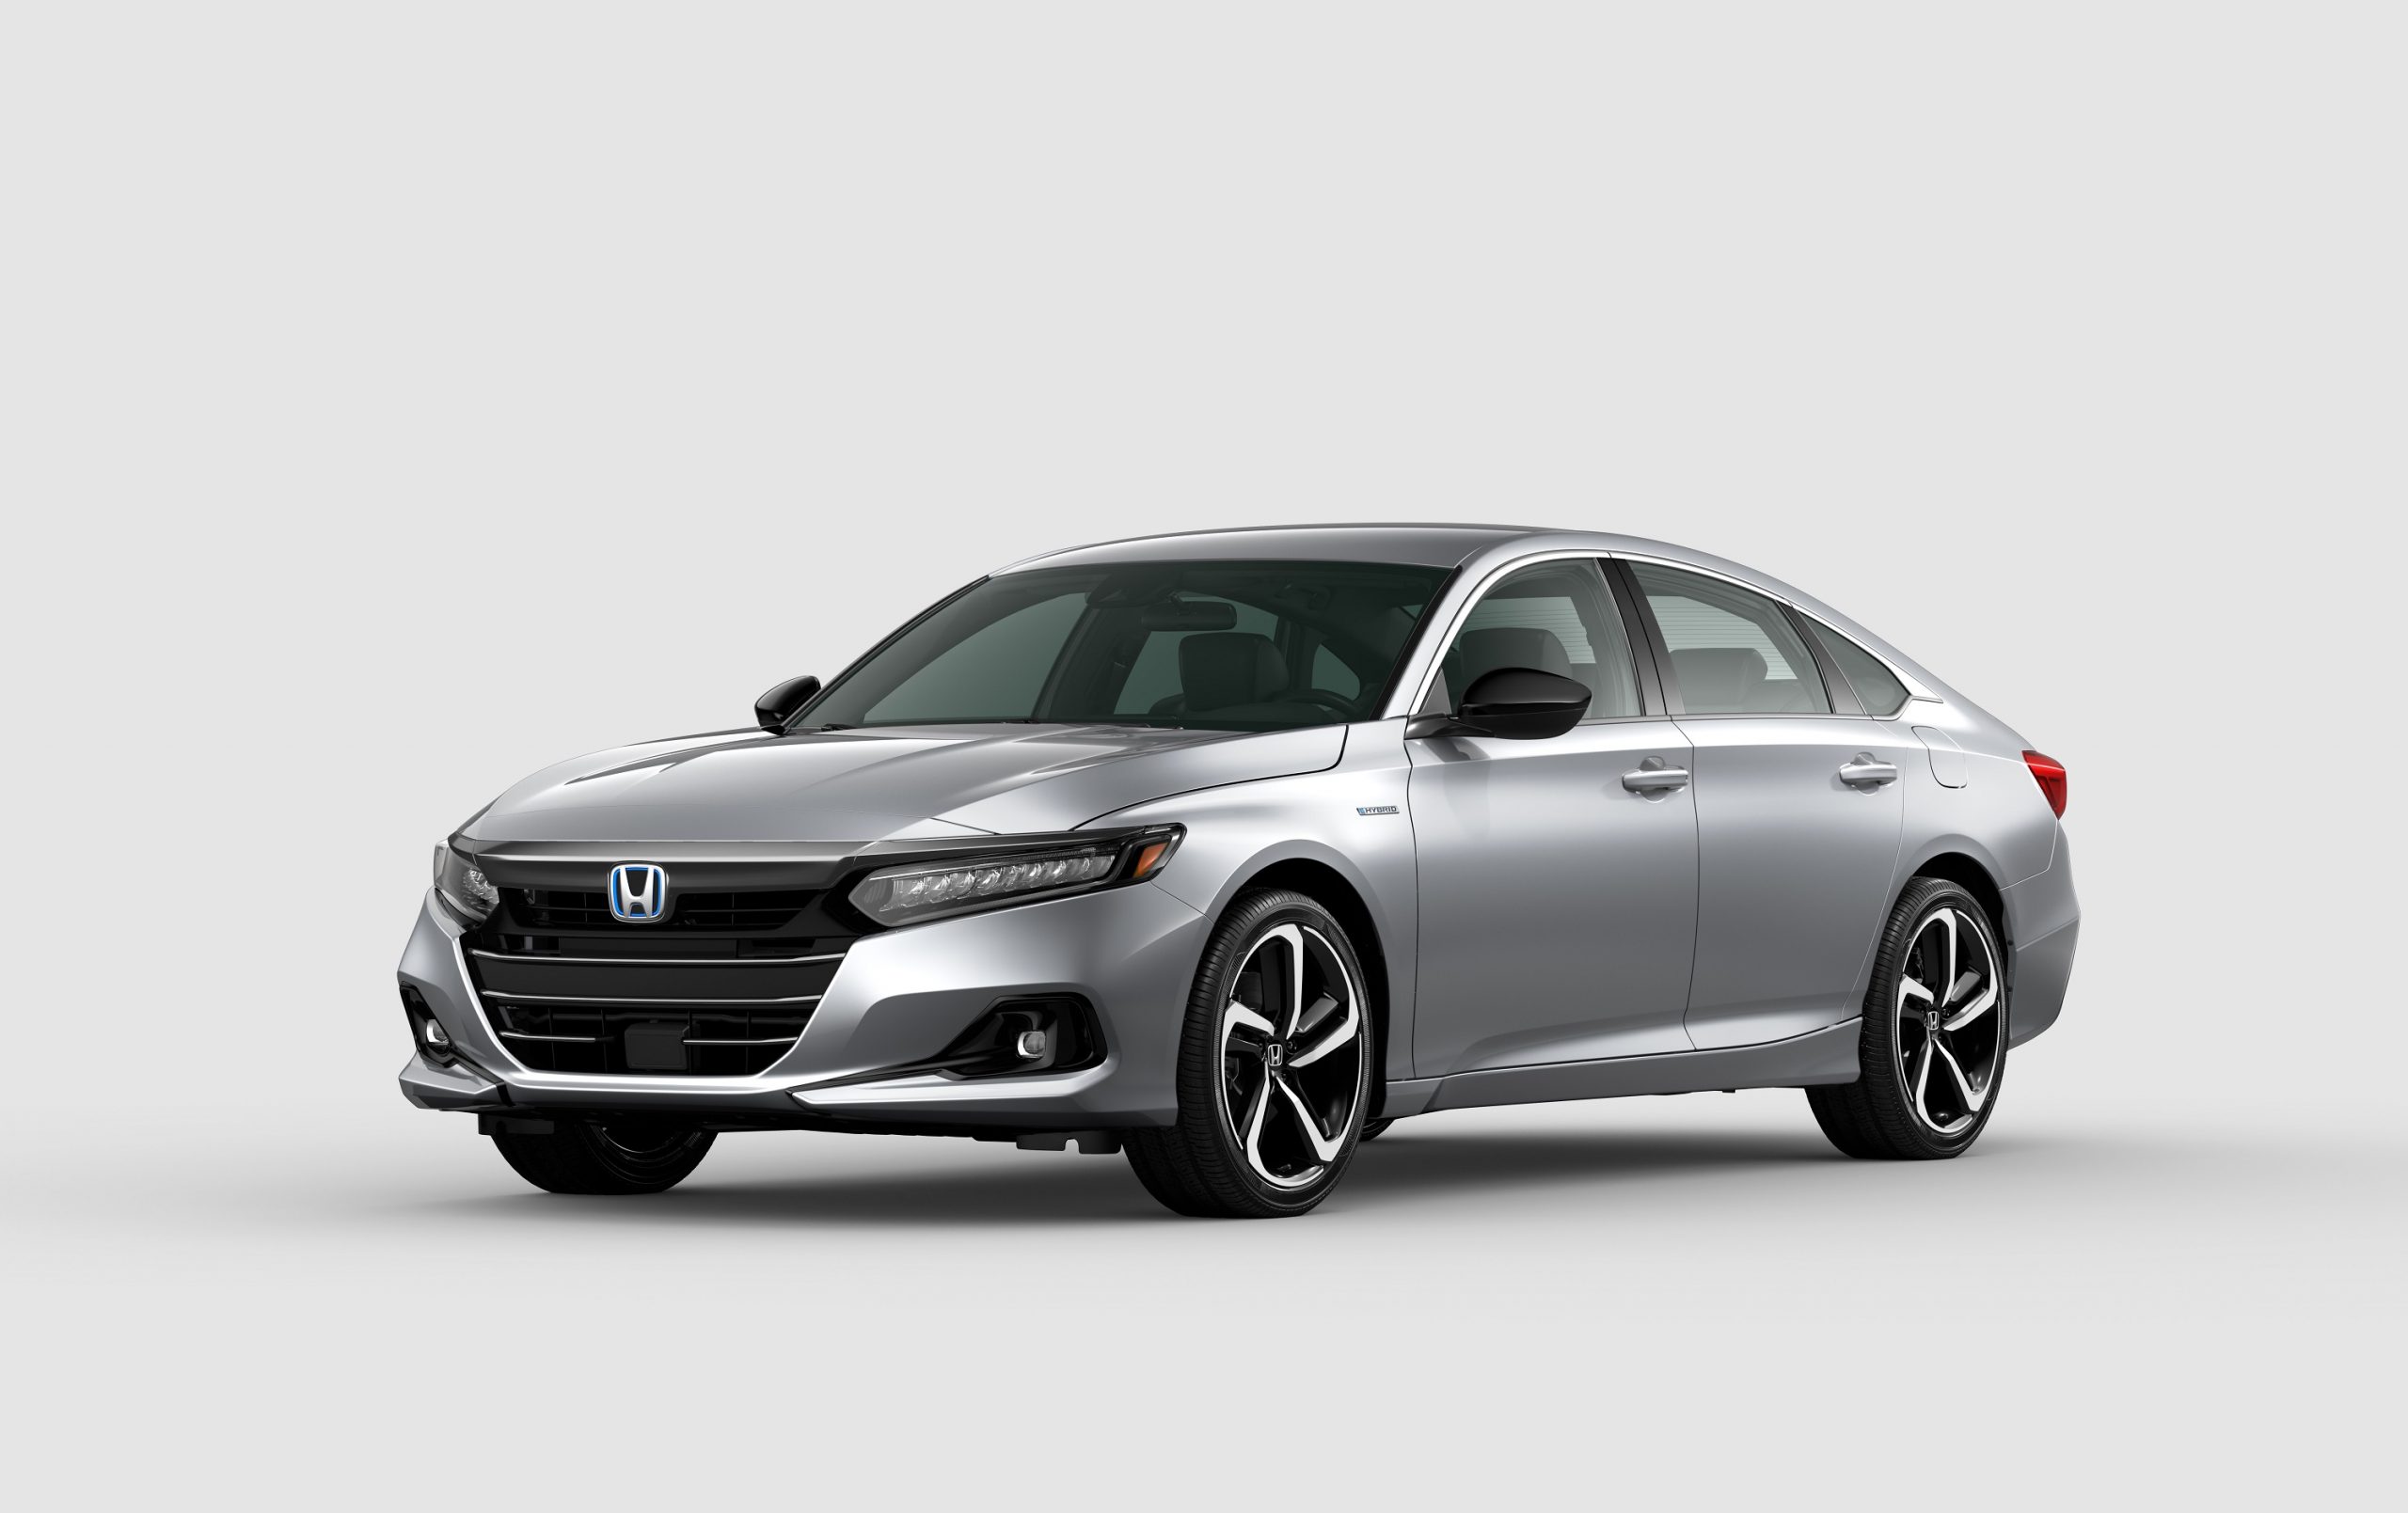 A silver 2022 Honda Accord midsize sedan, rated by Consumer Reports as the most reliable midsize sedan